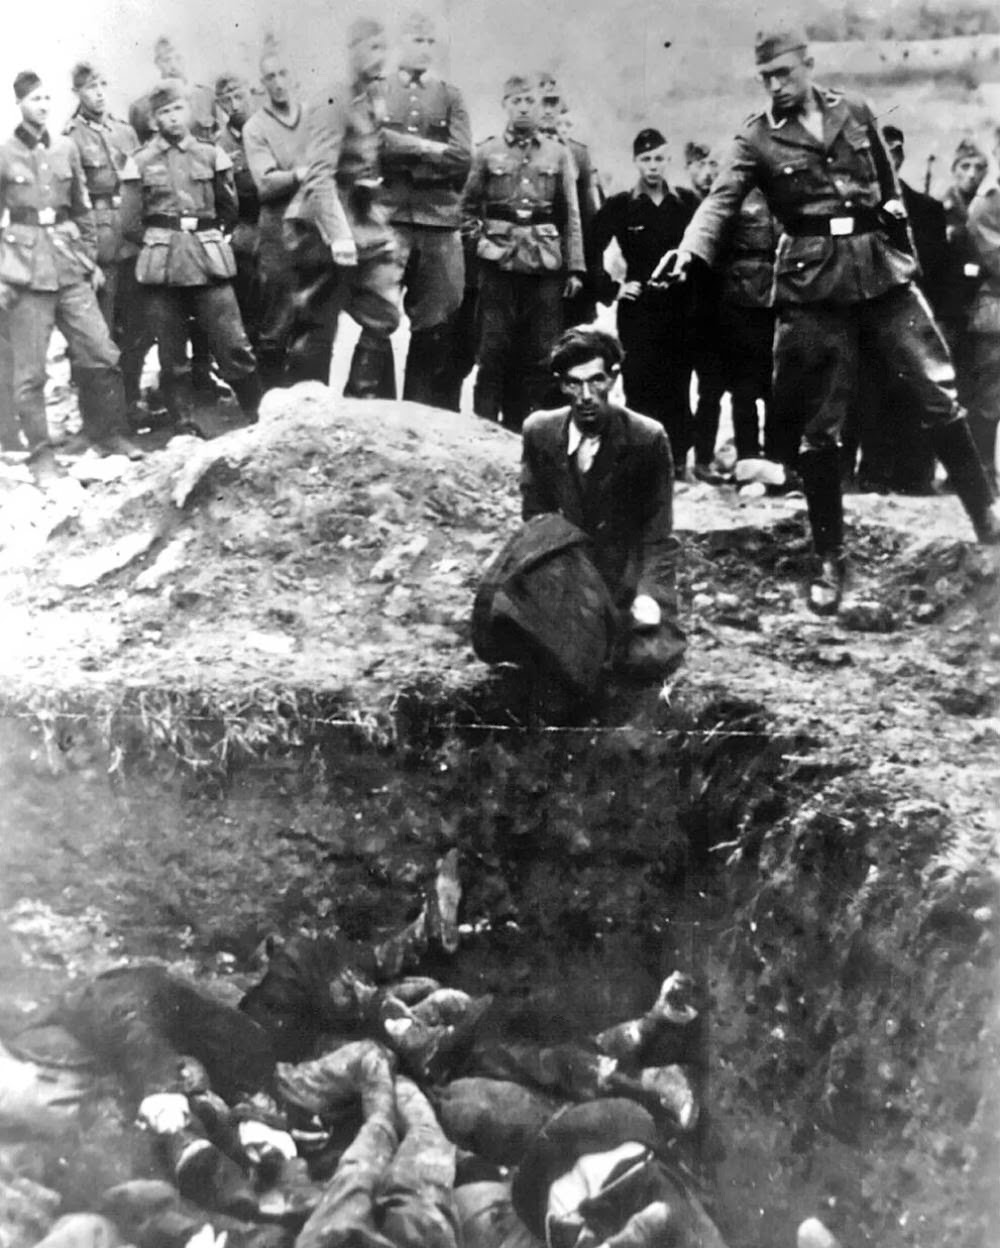 “The last Jew in Vinnitsa” – Member of Einsatzgruppe D (a Nazi SS death squad) is just about to shoot a Jewish man kneeling before a filled mass grave in Vinnitsa, Ukraine, in 1941. All 28,000 Jews from Vinnitsa and its surrounding areas were massacred.